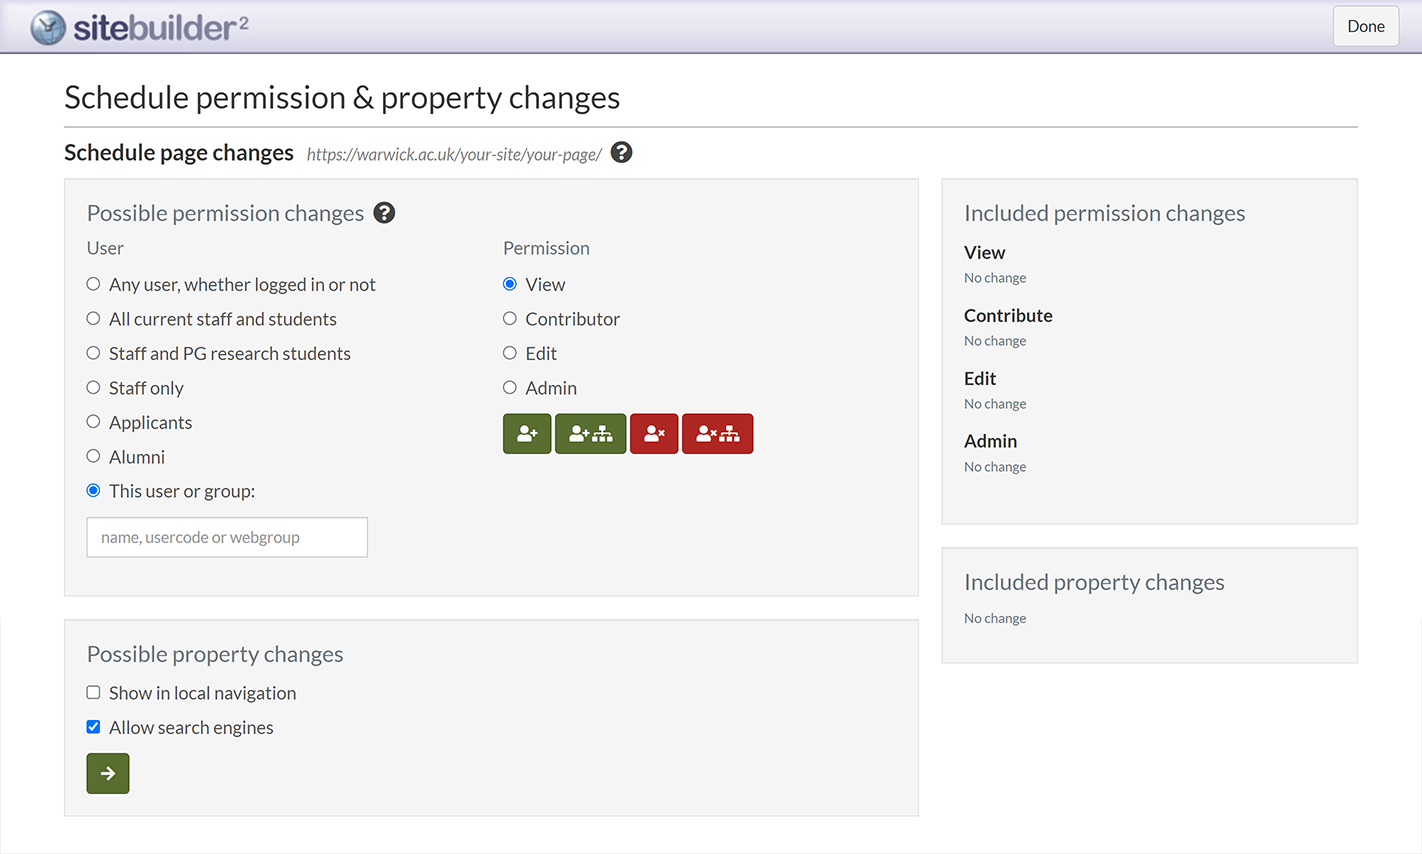 The 'Schedule permission & property changes' screen